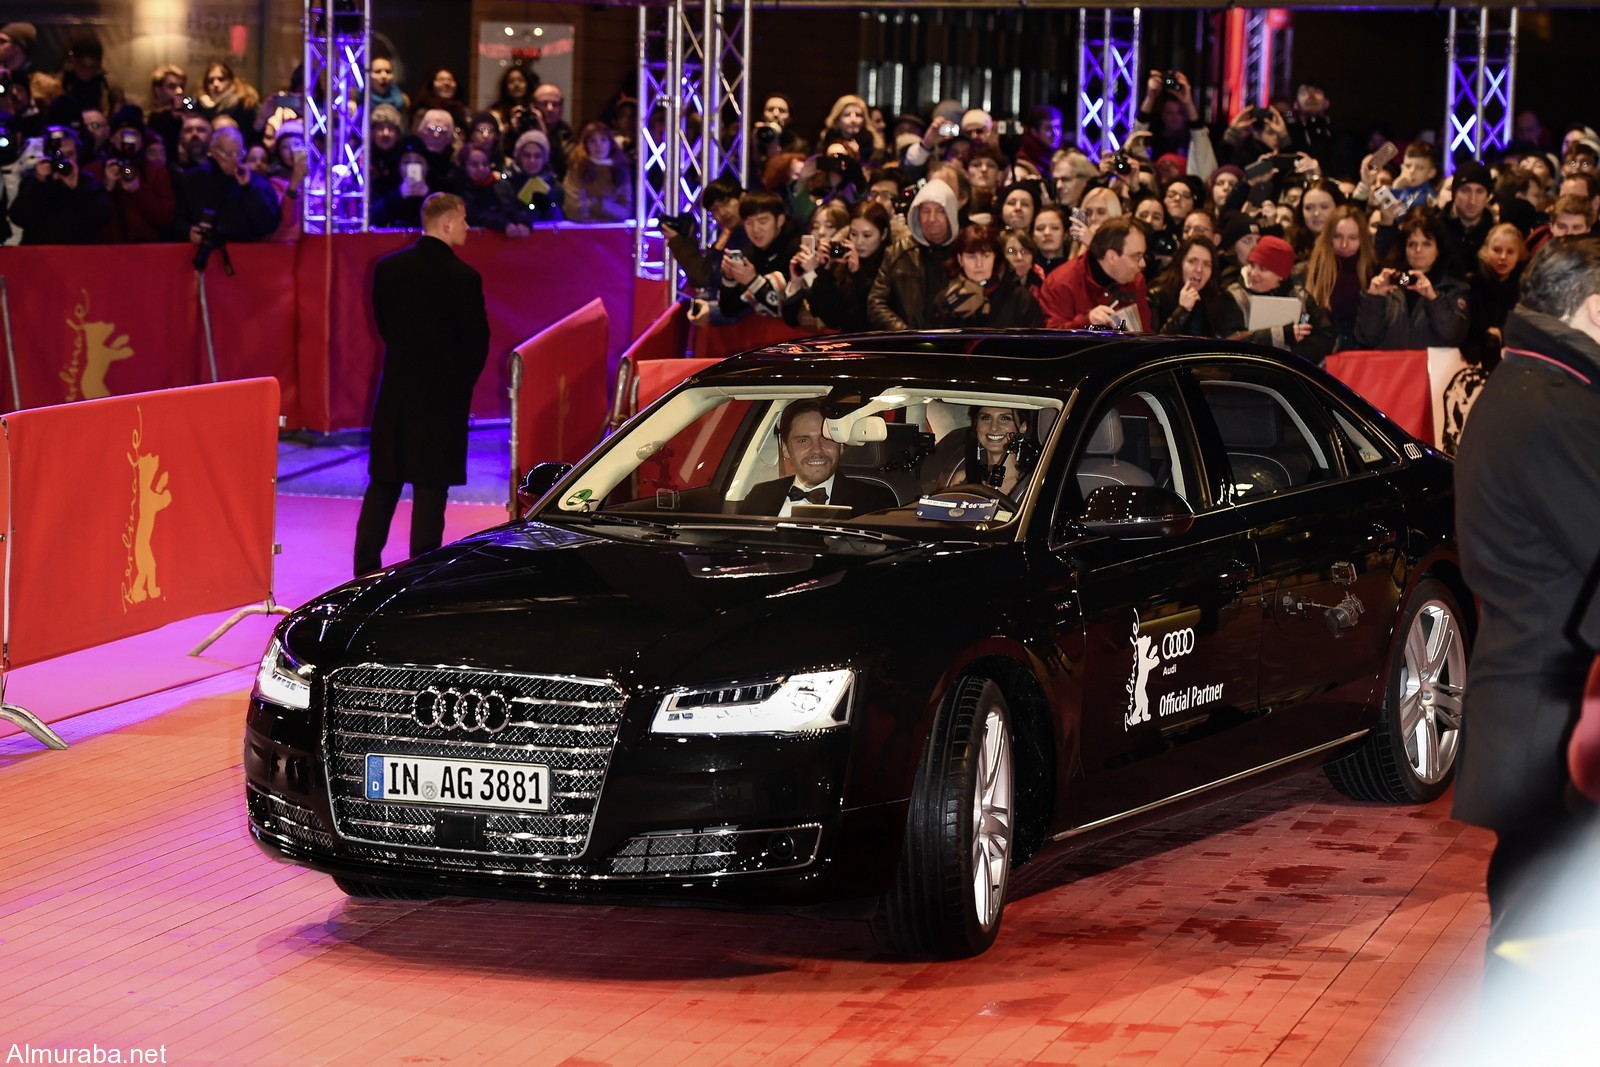 A piloted driving Audi A8 L W12 brings Daniel Brühl and his girlfriend Felicitas Rombold to the red carpet